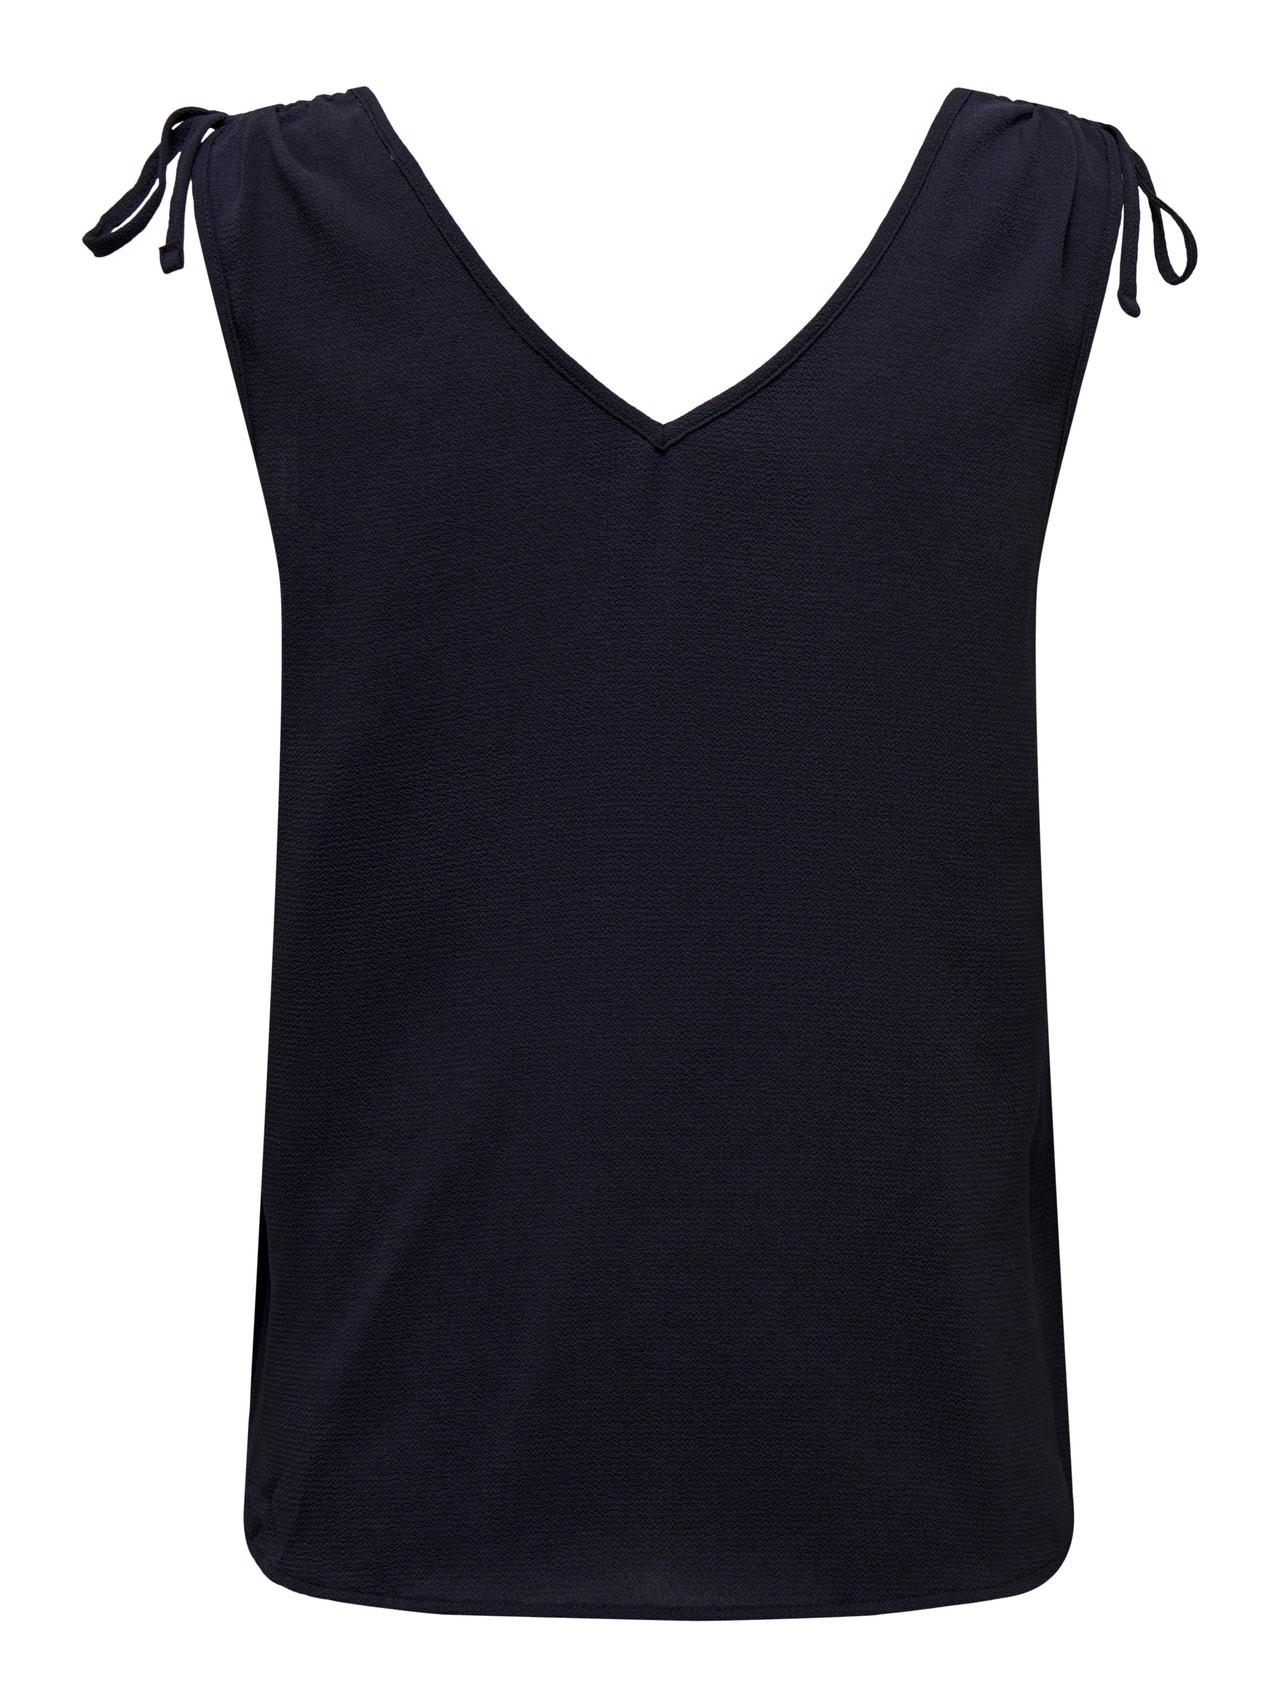 ONLY V-Neck Top With Strap Details -Night Sky - 15300913